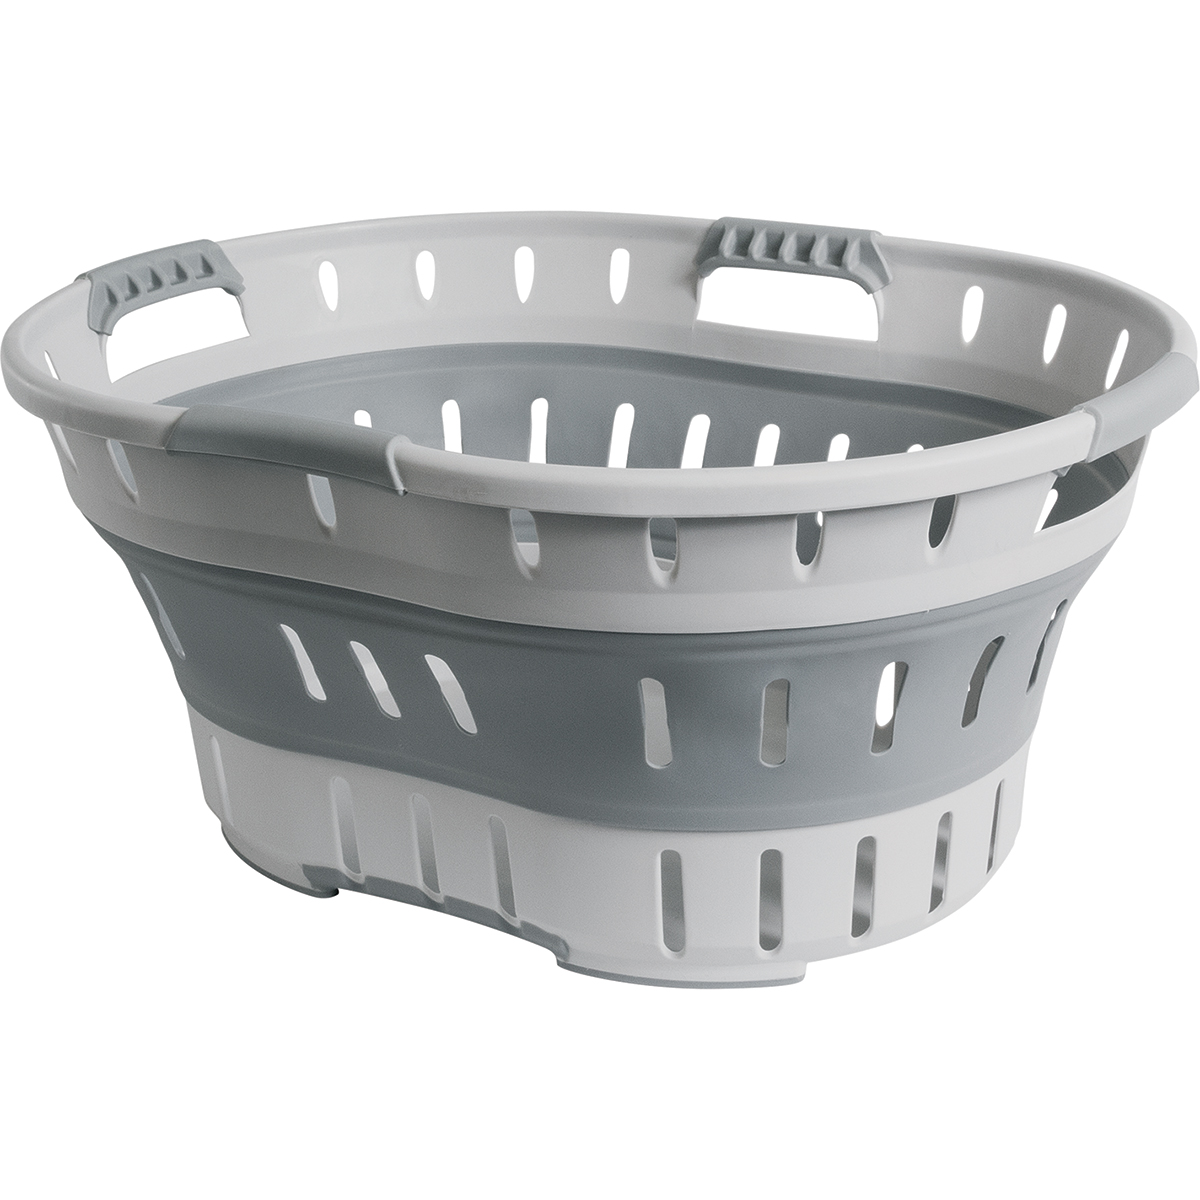 Companion Deluxe Pop Up Laundry Basket Grey